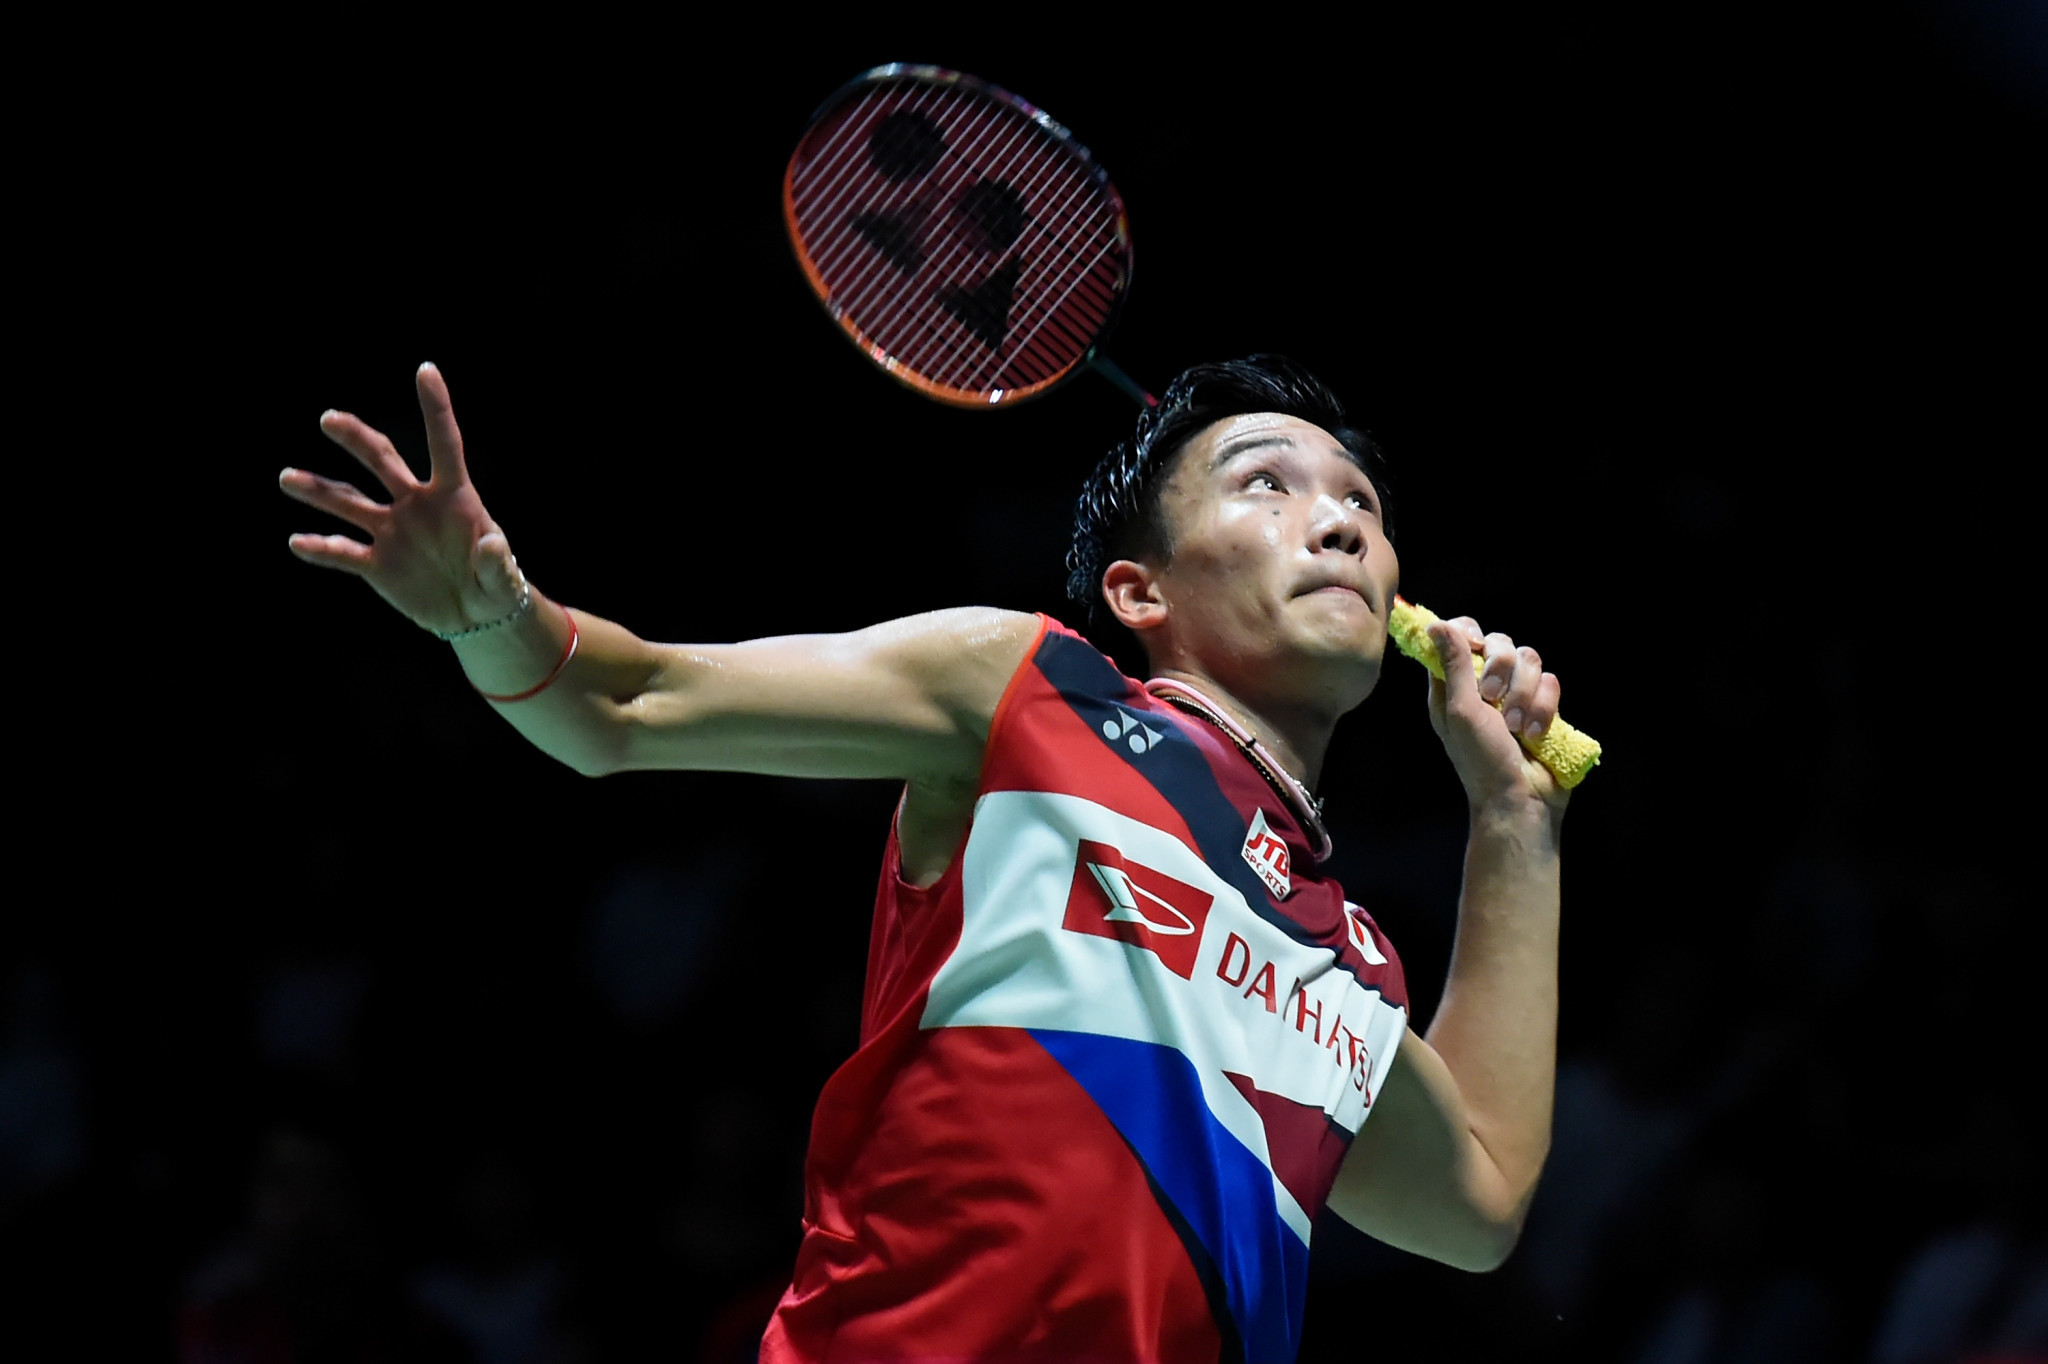 Top seed Kento Momota needed three games to get past Indonesia's Anthony Ginting ©Getty Images